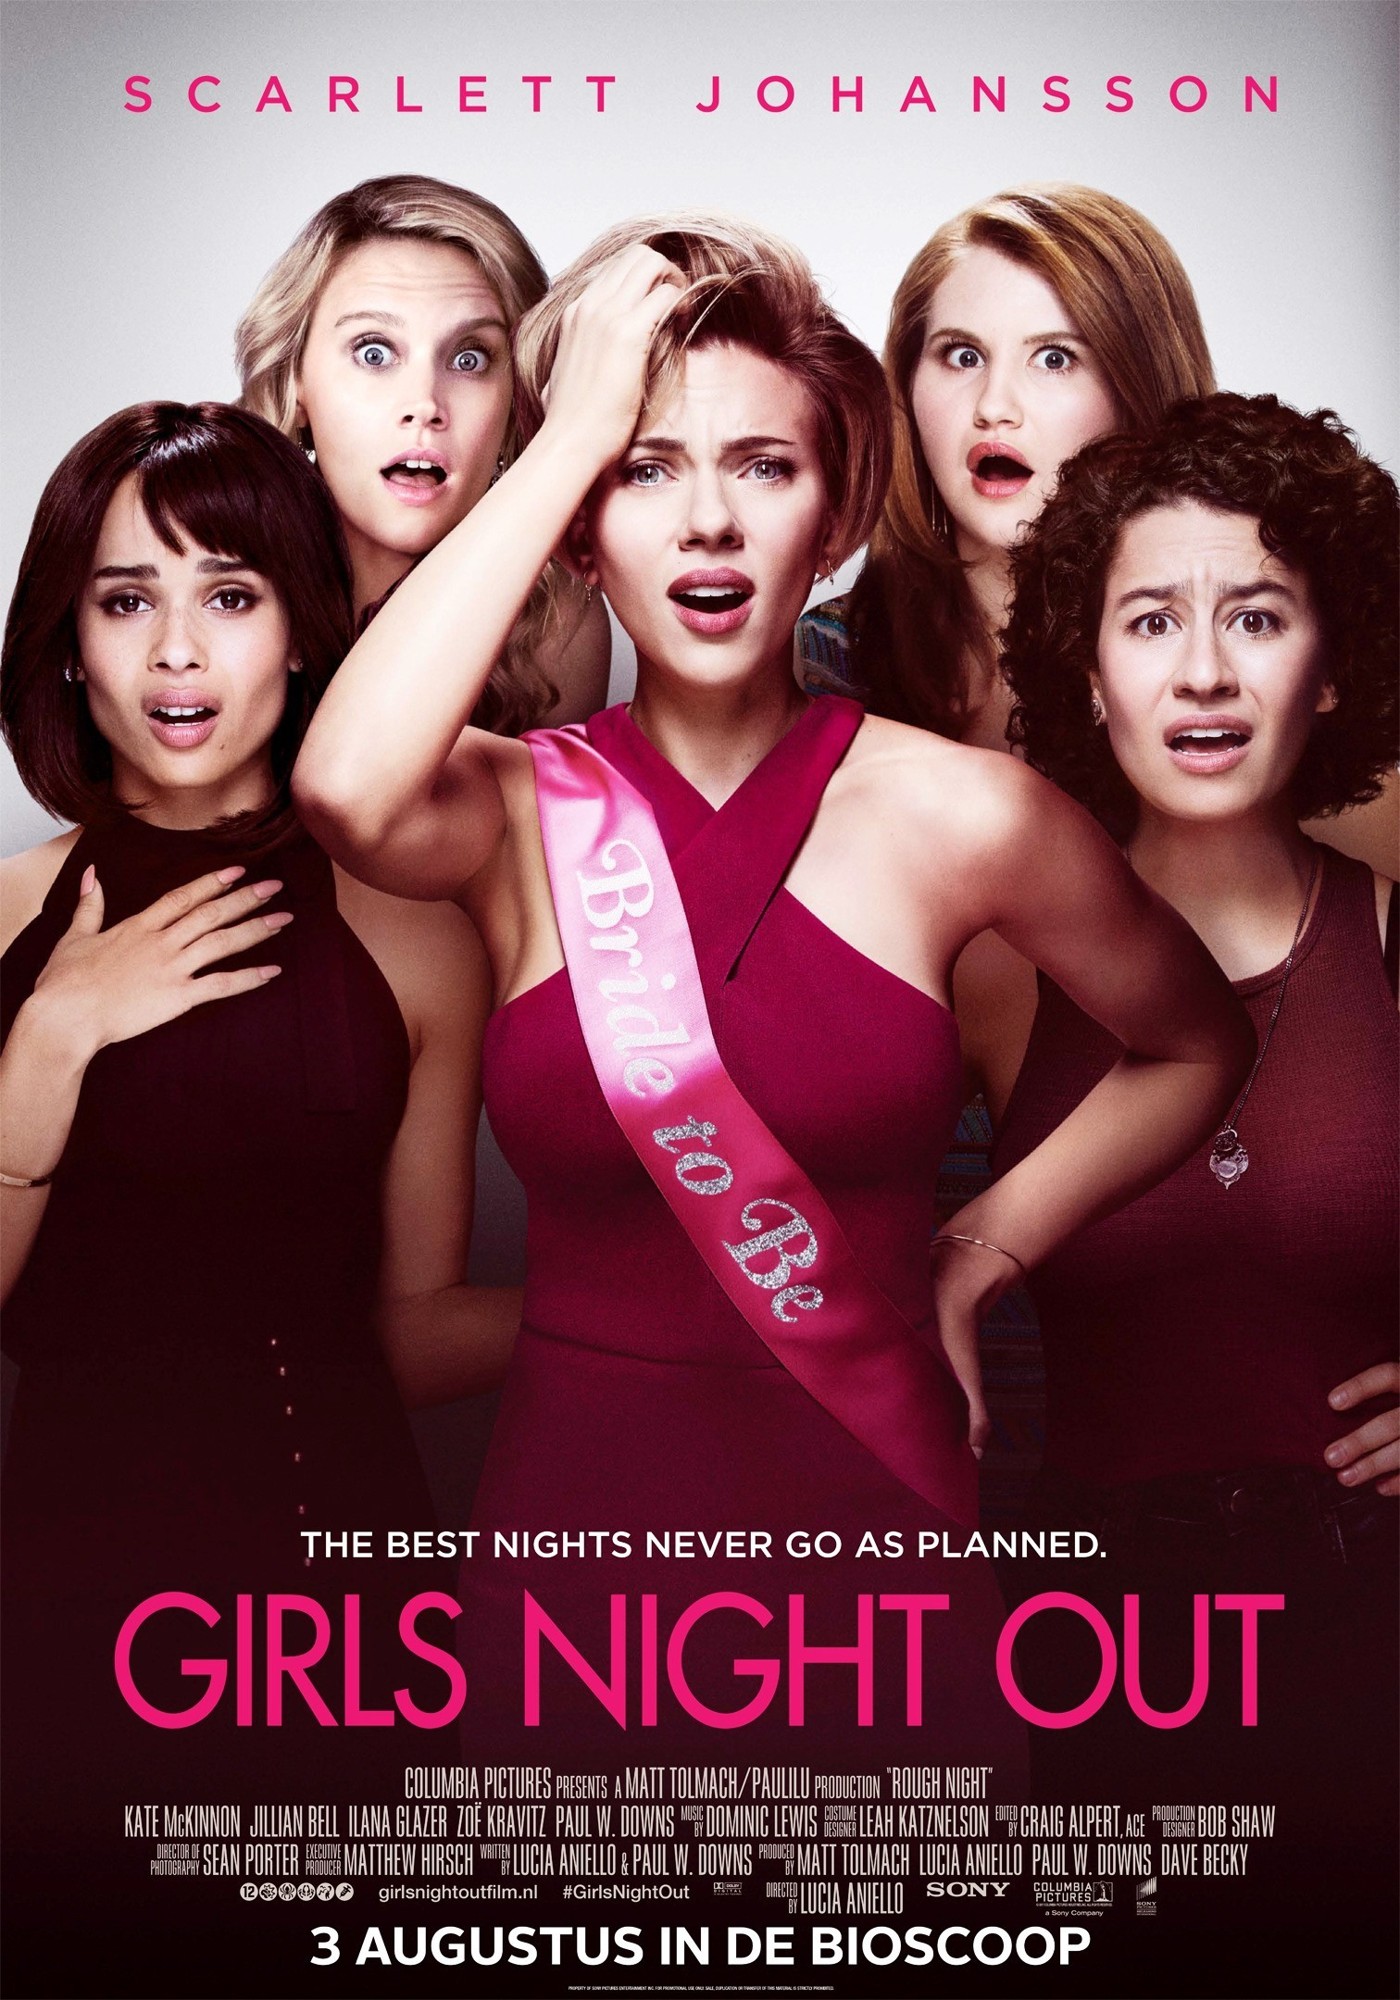 Poster of Sony Pictures' Rough Night (2017)